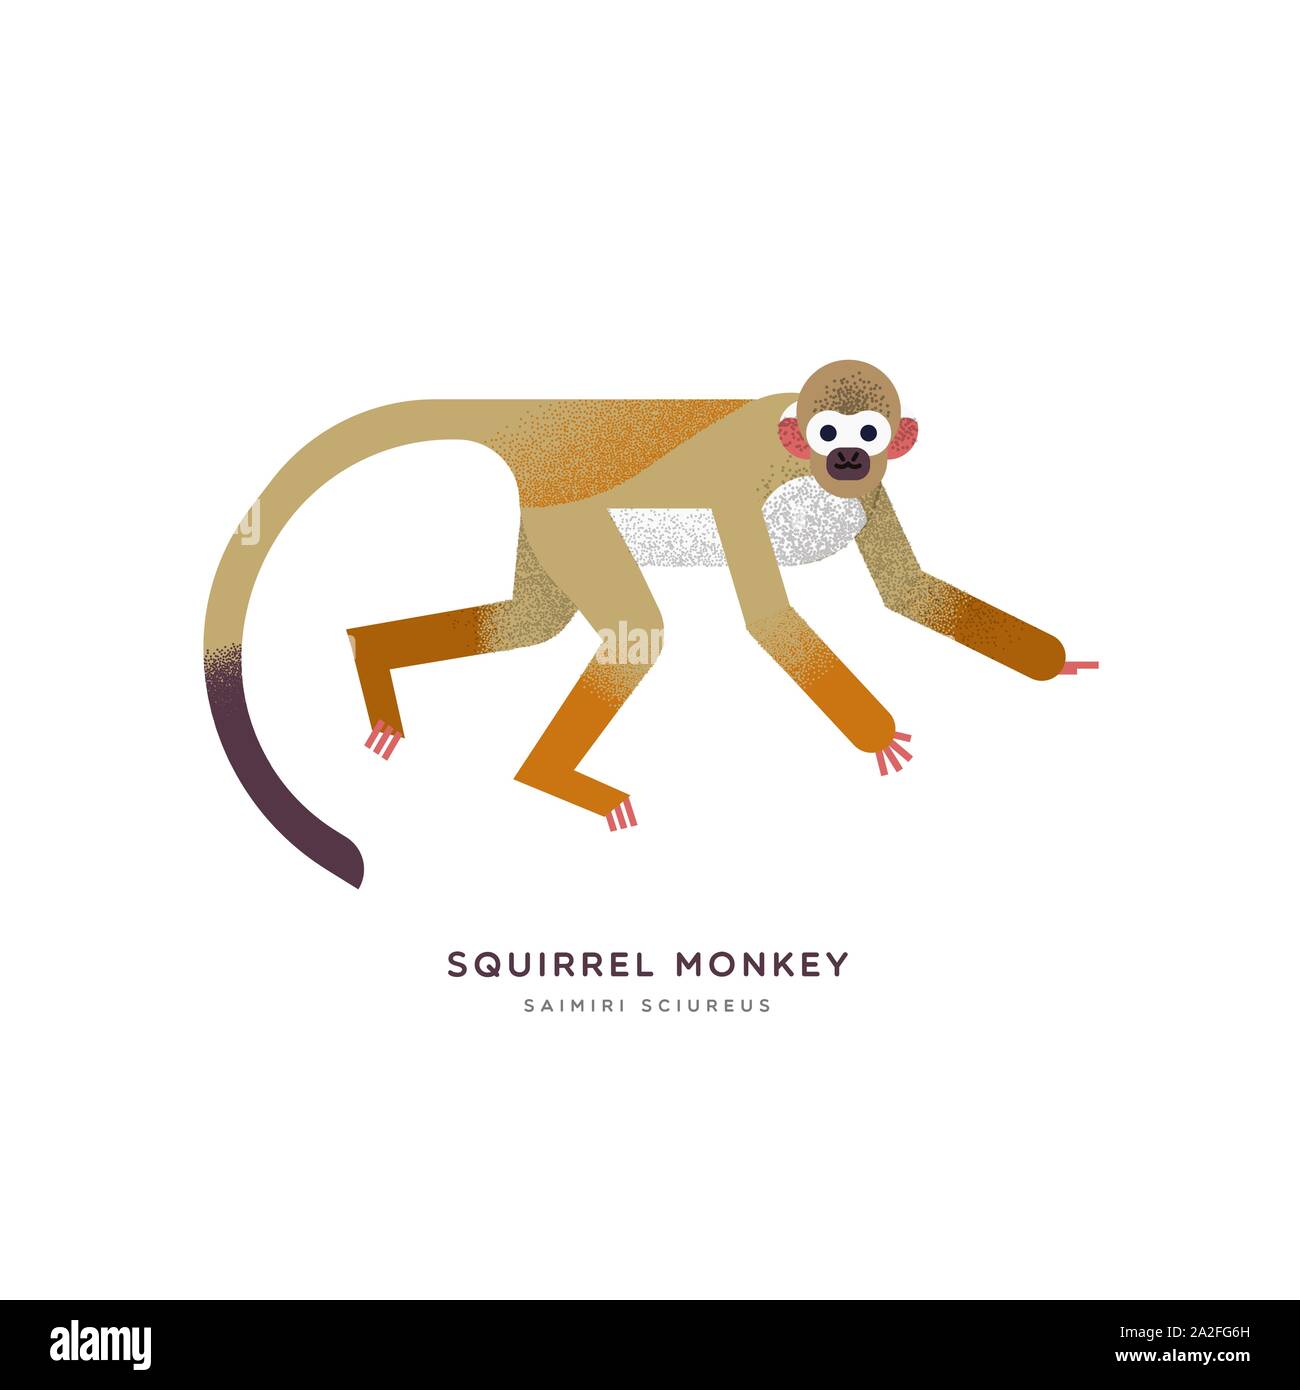 Squirrel monkey animal illustration on isolated white background. Educational wildlife design with fauna species name label. Stock Vector